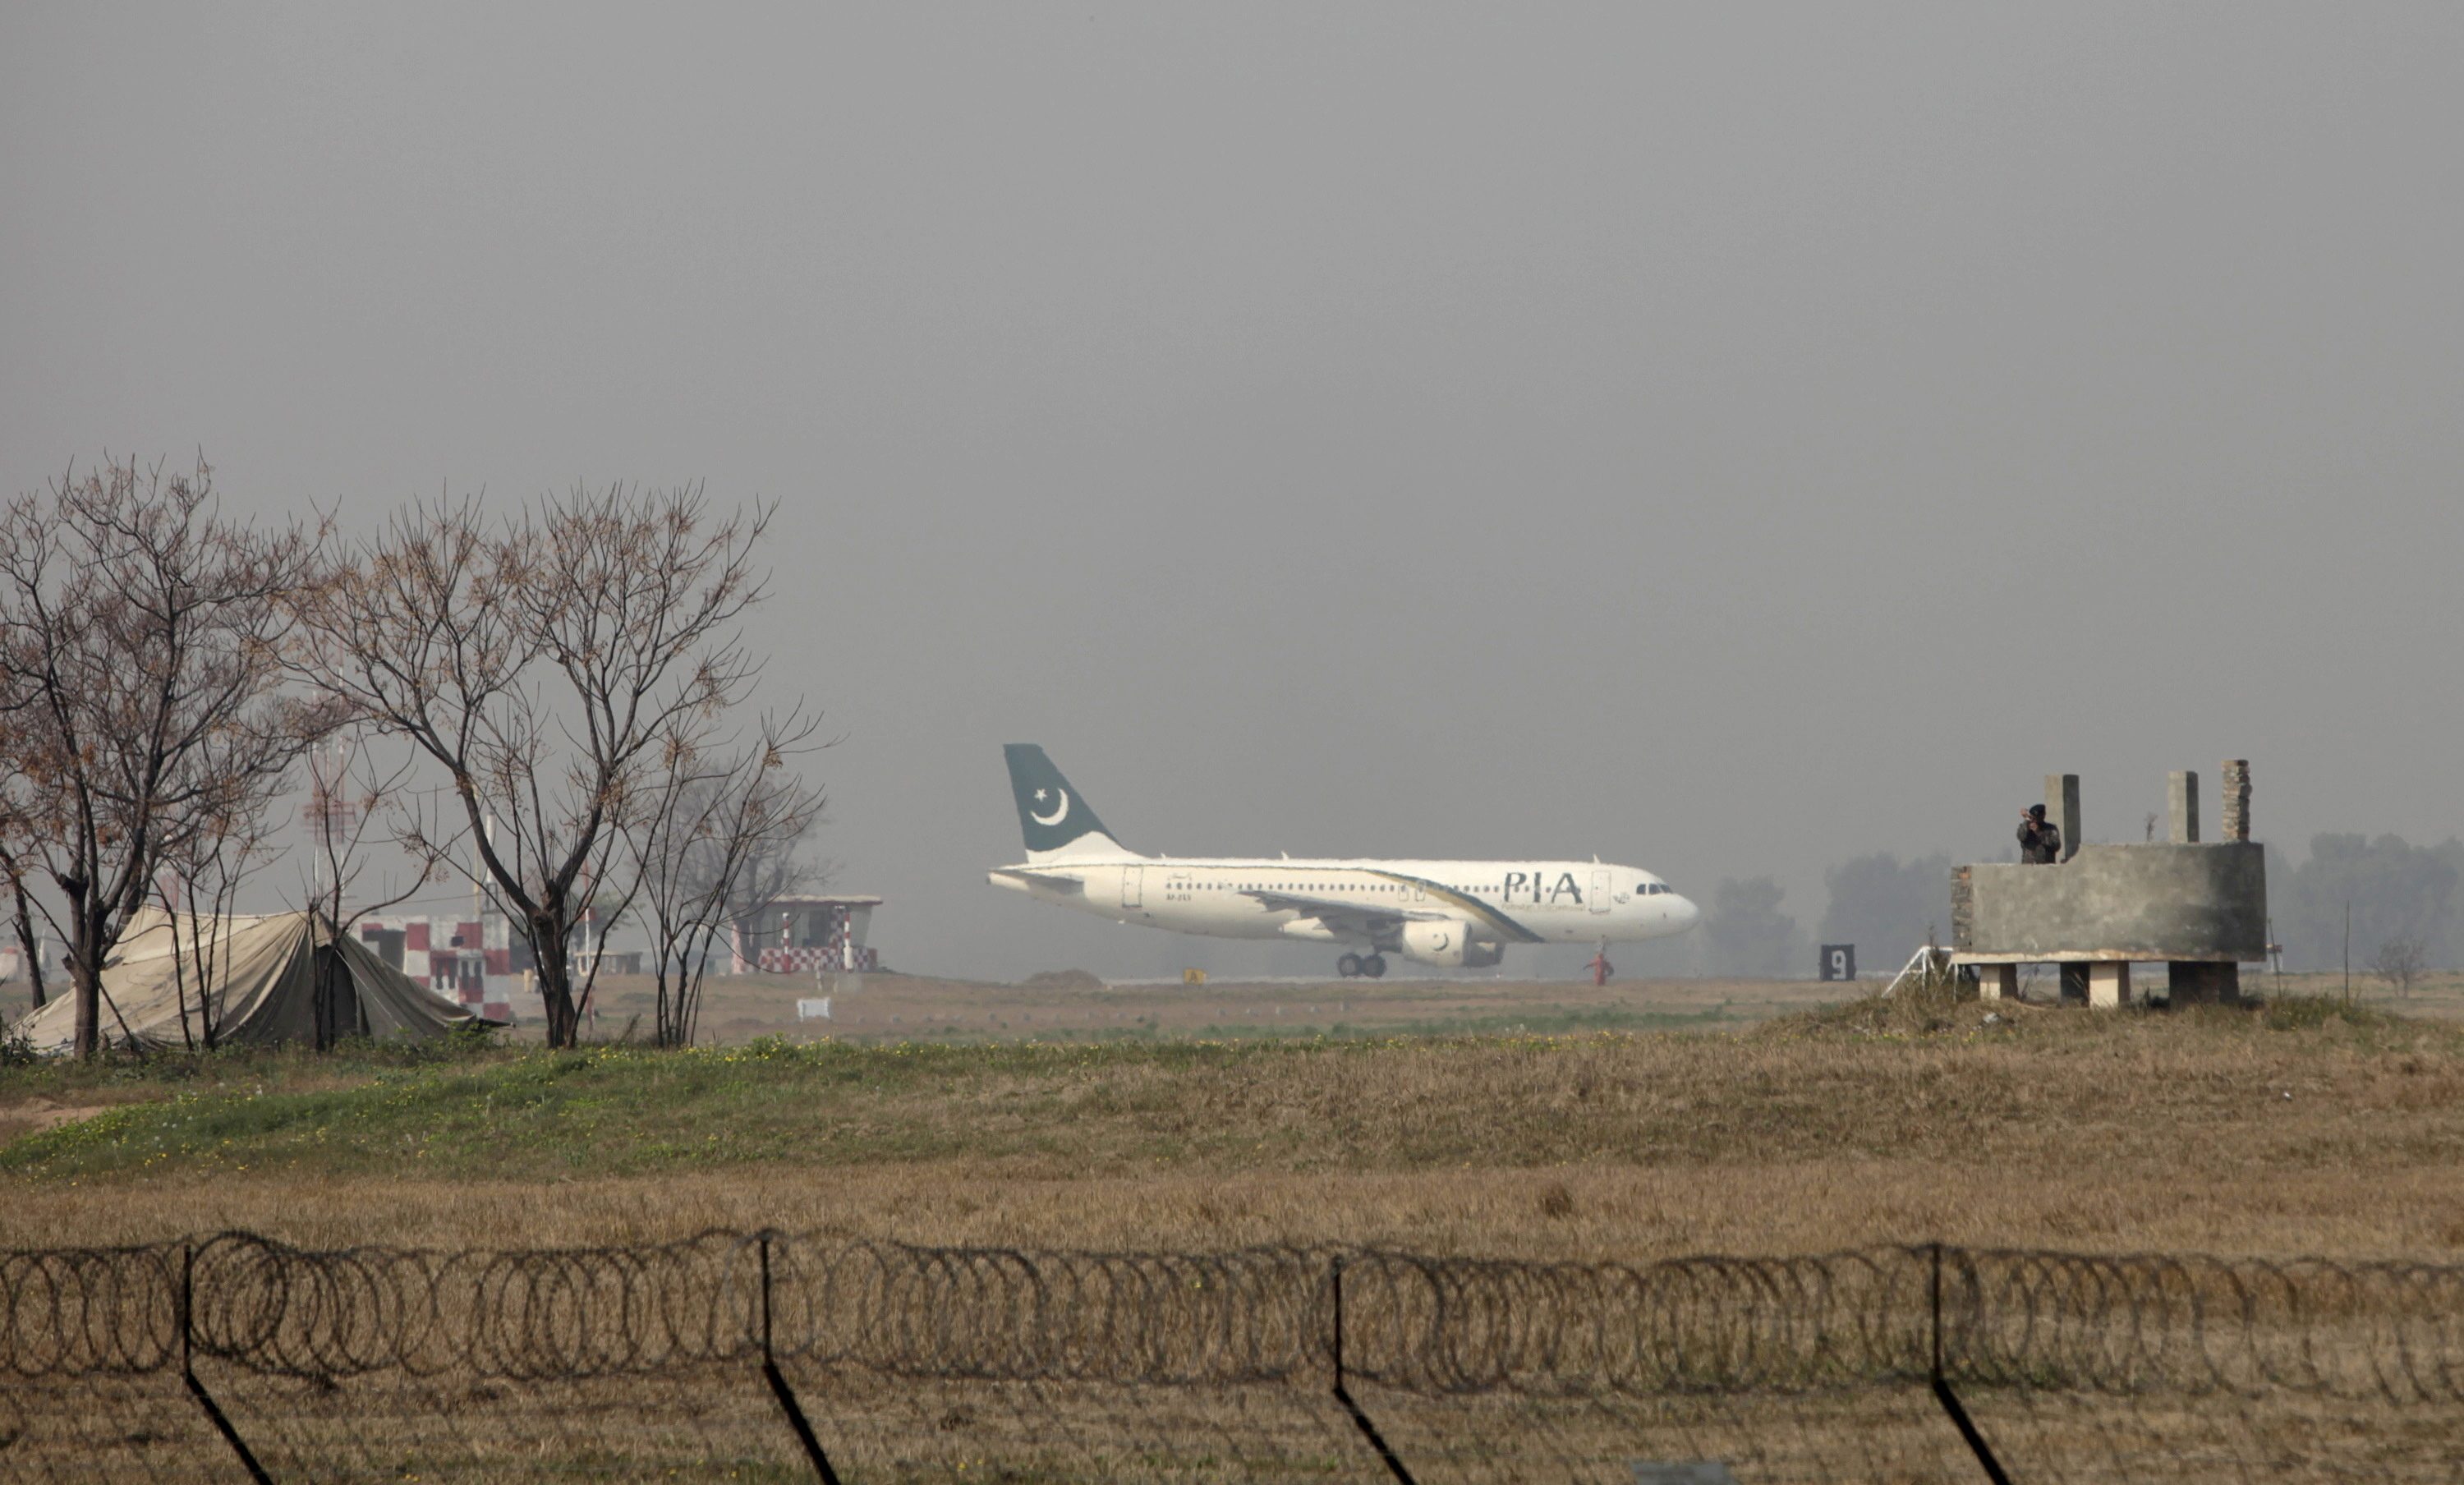 Pakistan Airlines suspends Afghan operations citing Taliban interference